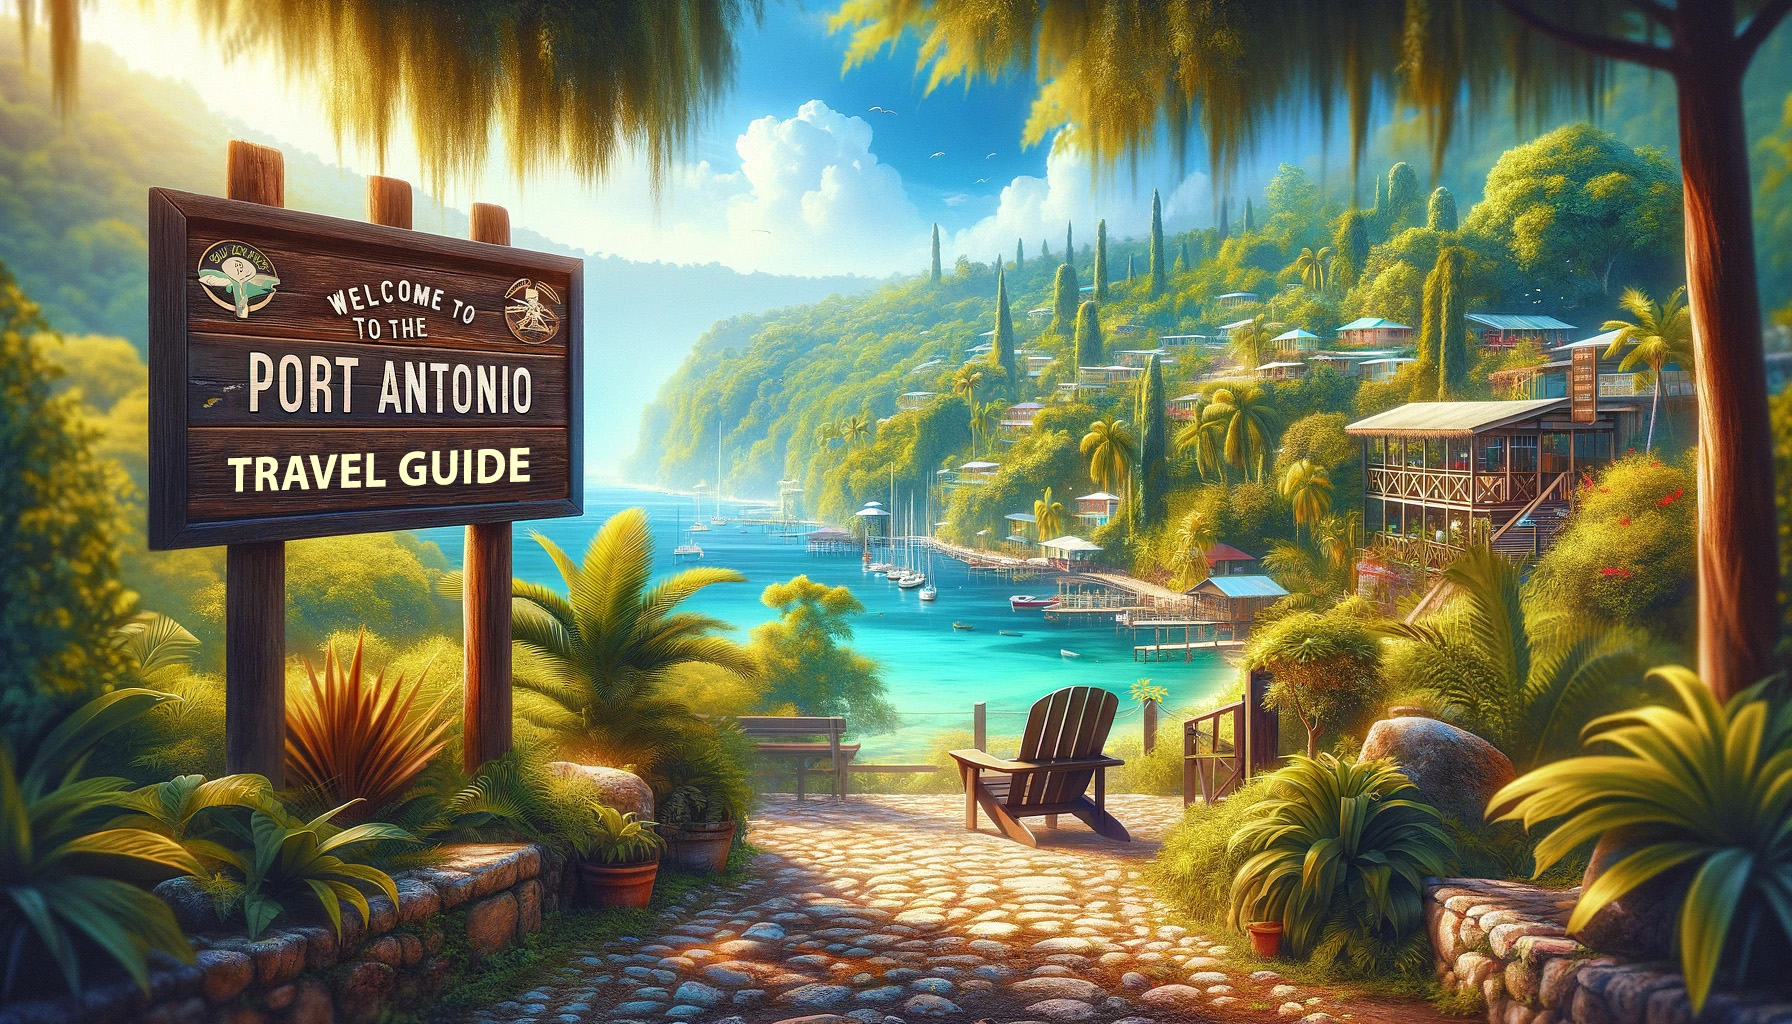 Welcome to the Port Antonio Travel Guide